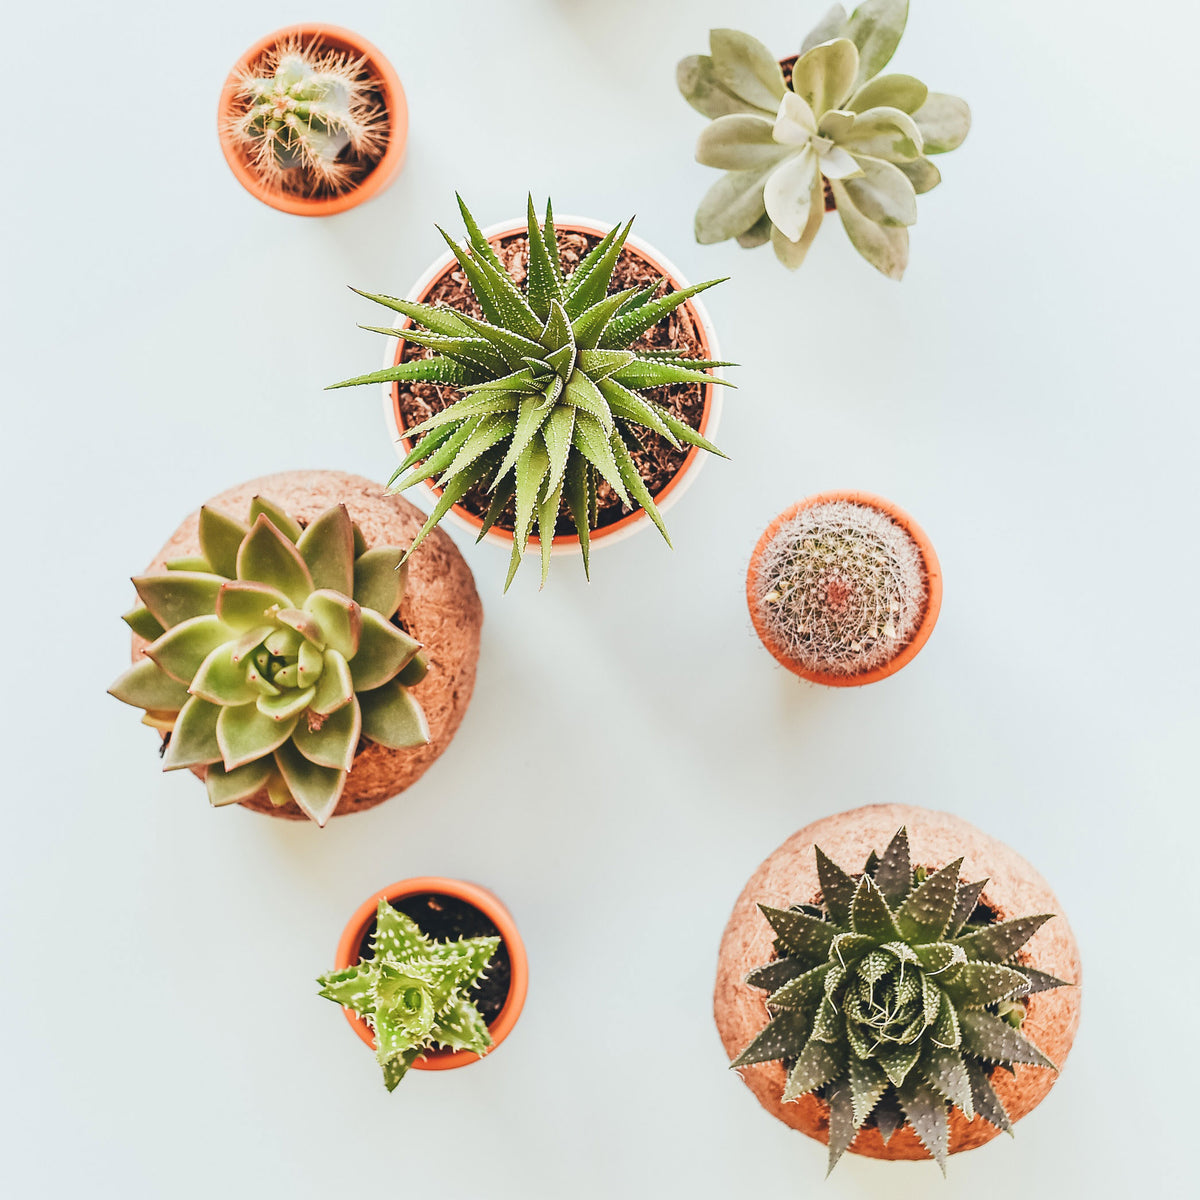 How to Choose the Best Planter